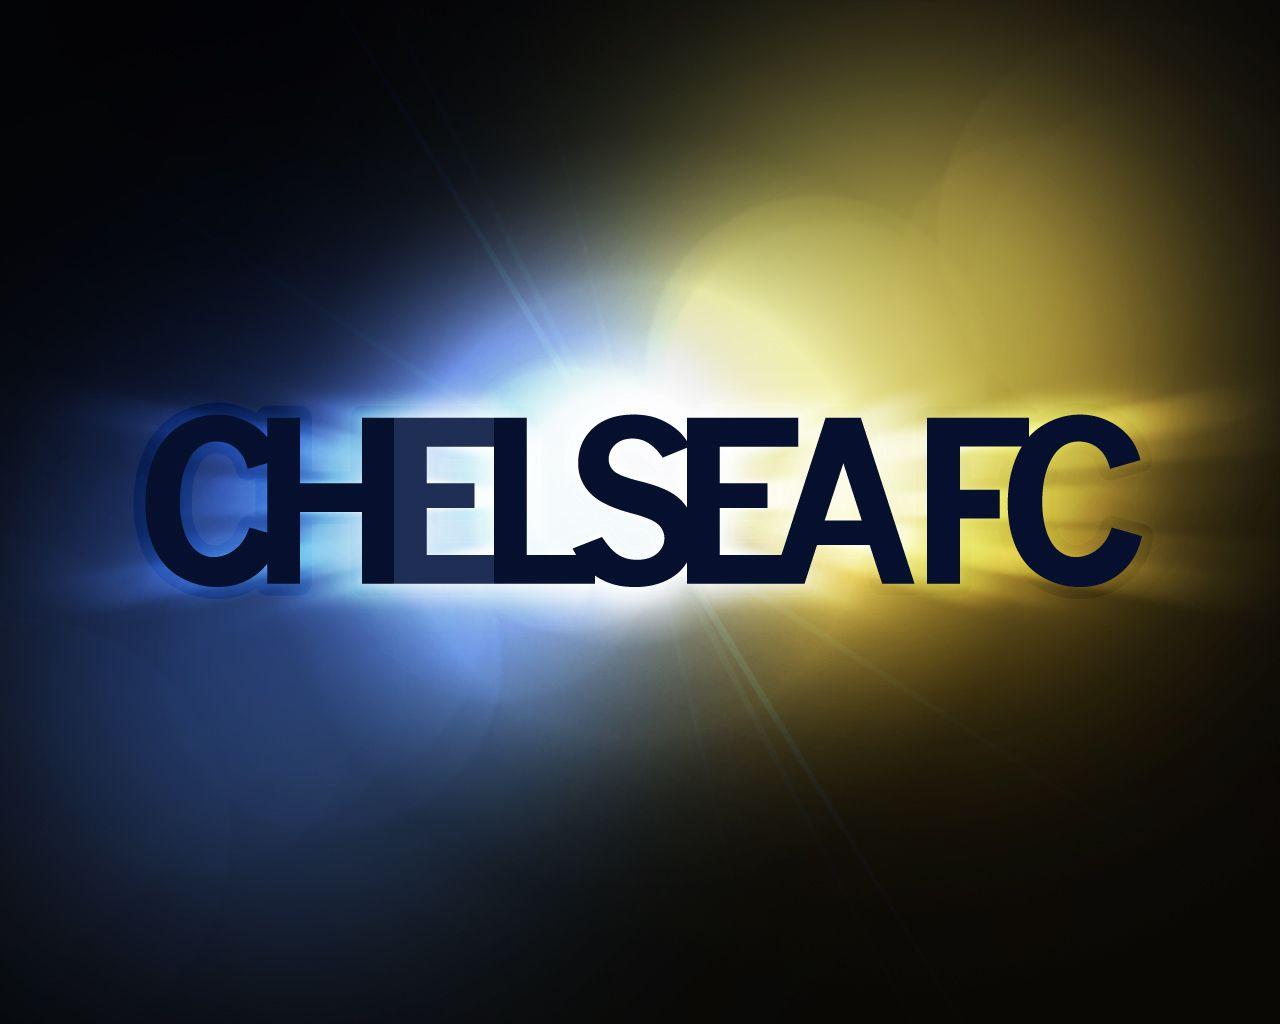 Chelsea FC. High Definition Wallpaper, High Definition Picture